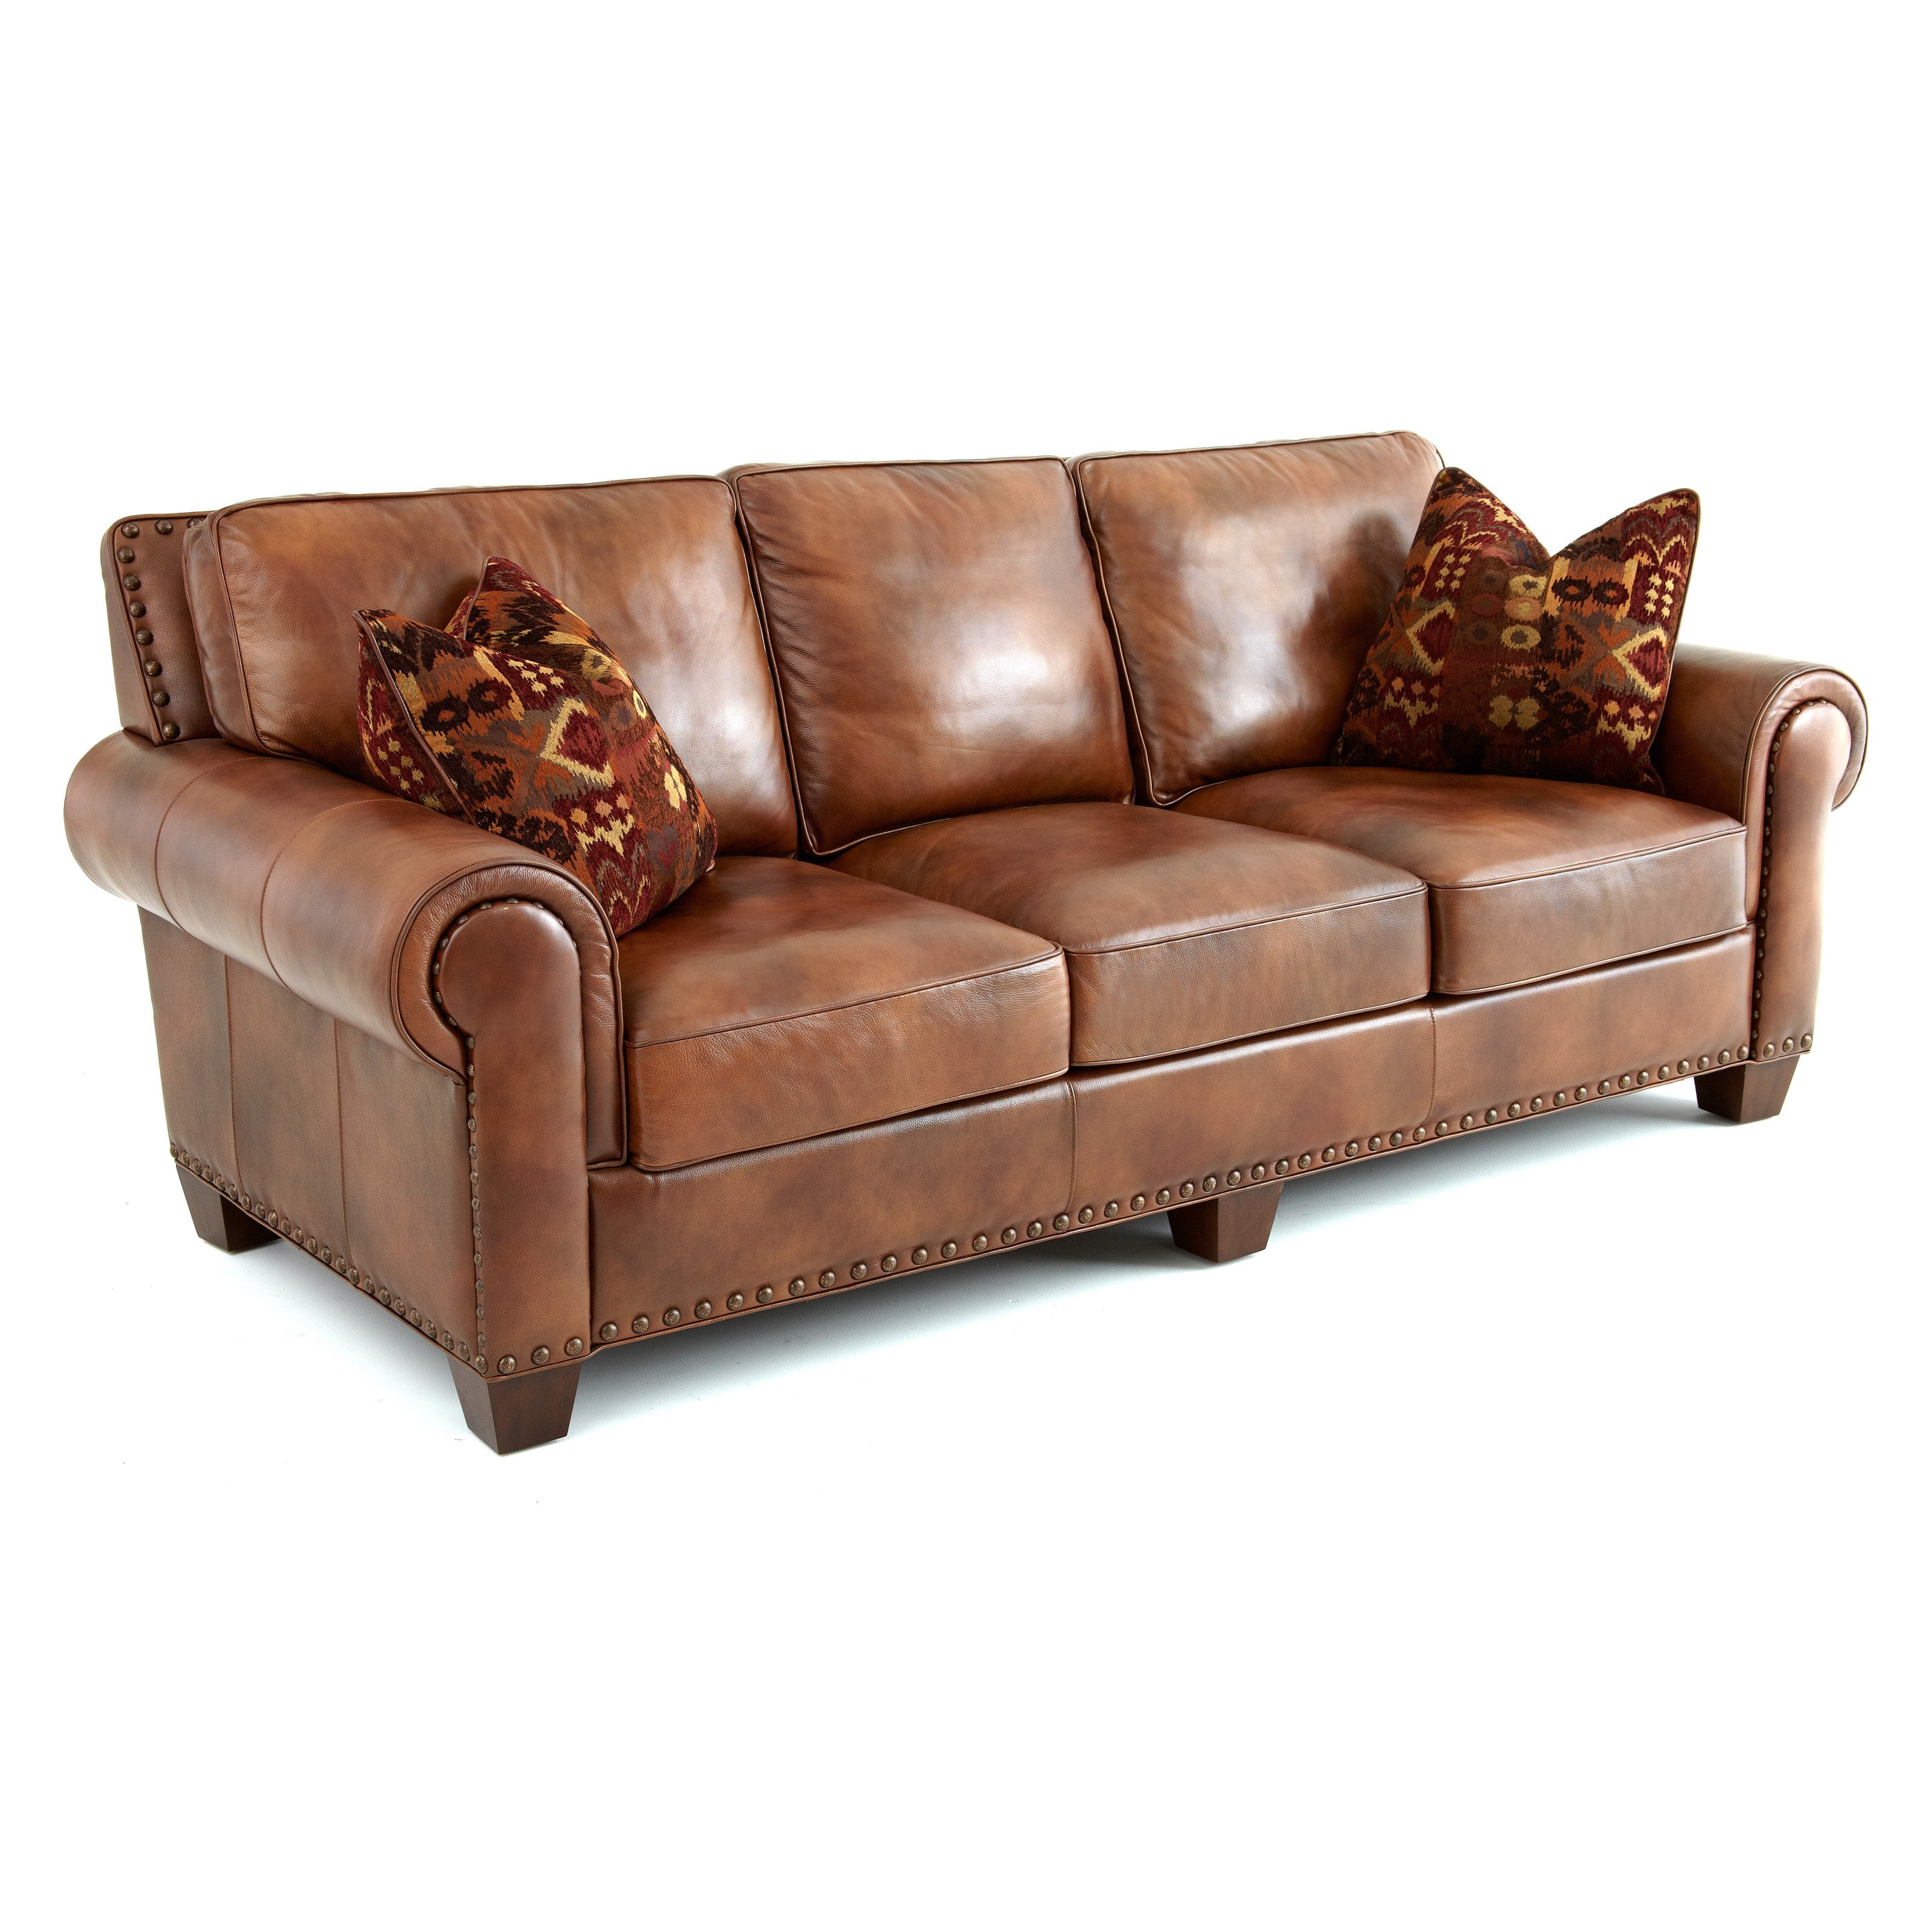 Steve Silver Silverado Leather Sofa with 2 Accent Pillows